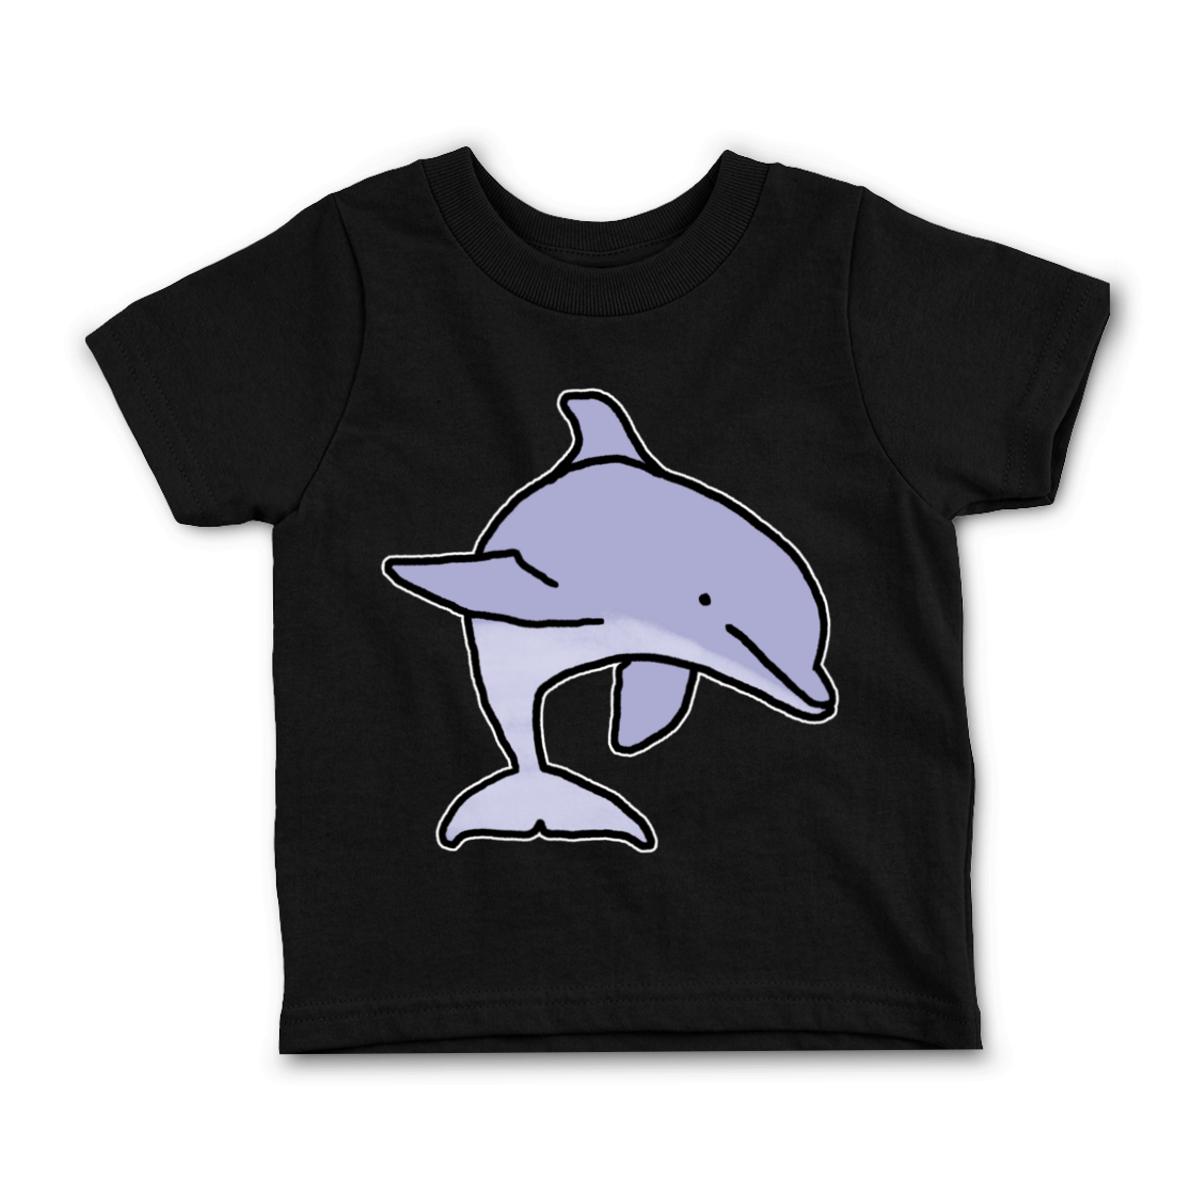 Dolphin Toddler Tee 56T black